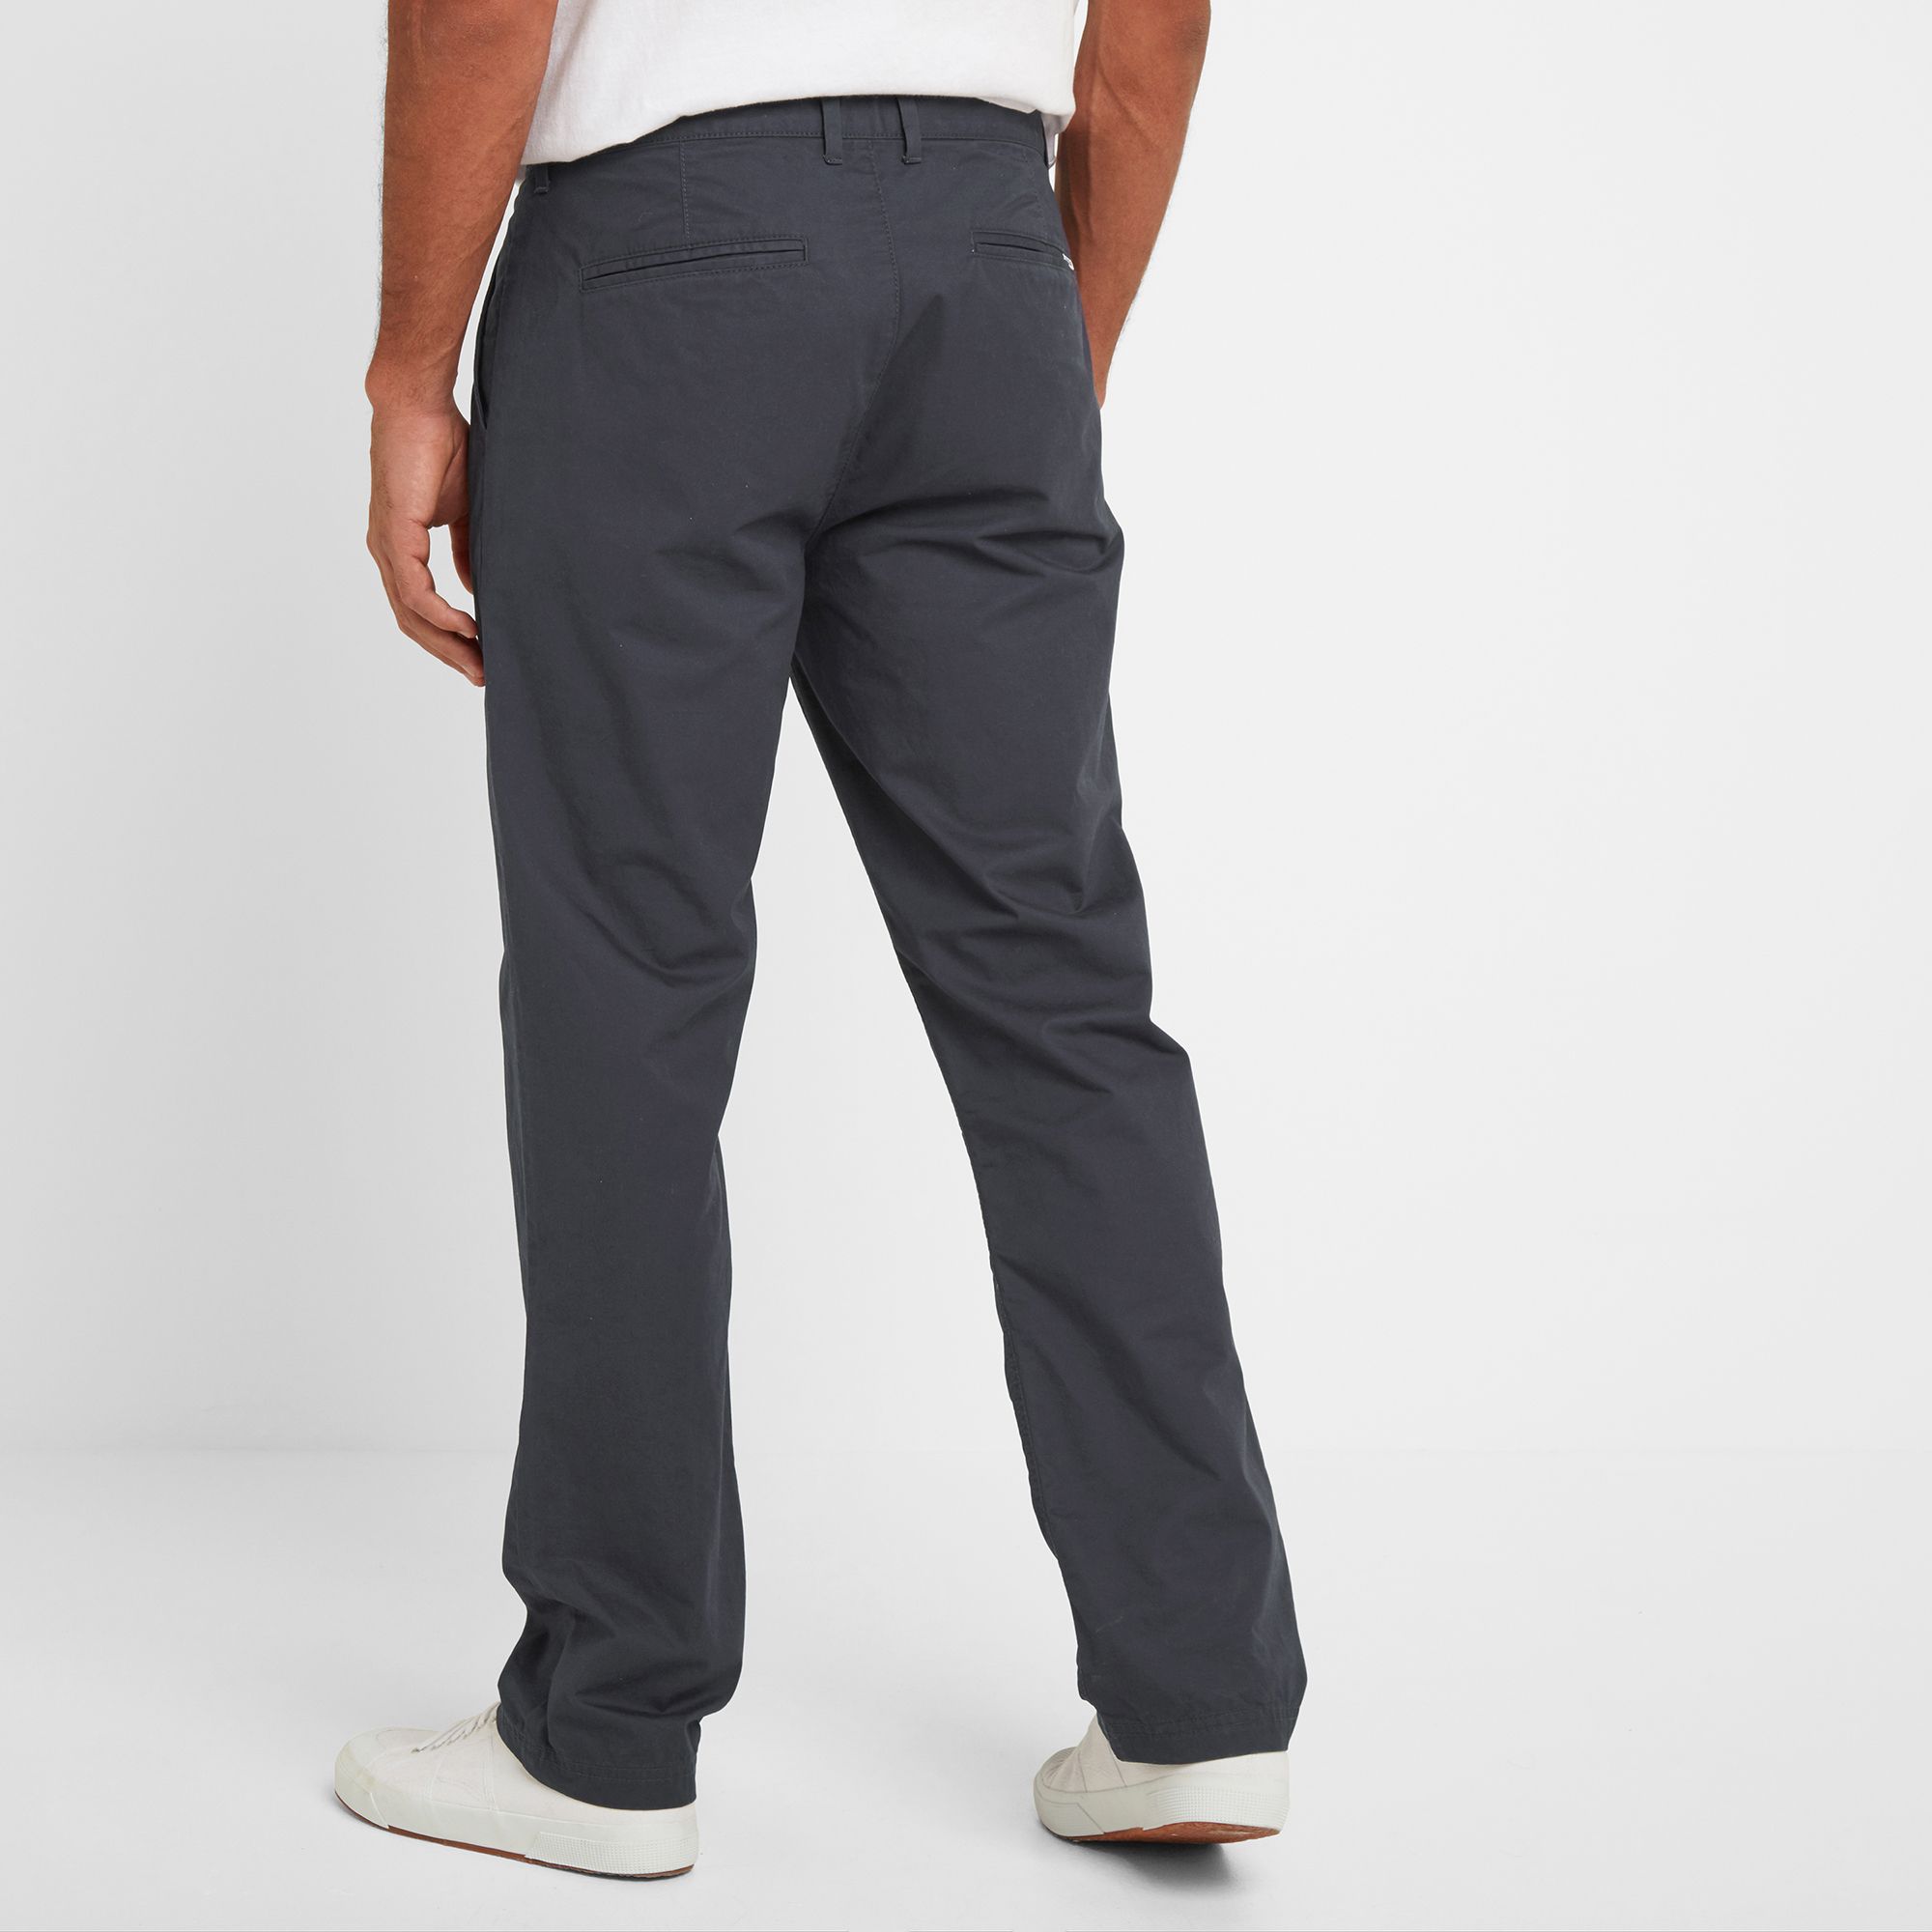 Designed in Yorkshire, these casual fit chinos are the ultimate versatile summer trousers made in a soft washed lightweight cotton. Smarter than jeans they're comfortable enough for a long walk through the countryside or along the cliffs and look right at home in the pub or wine bar at the end of the day. Our design team gave them a slightly longer leg that can be worn down or rolled up, and sits well over a walking boot or trainers. Darts at the back give them a great fit, and they hold securely at the waist with a hook and eye as well as a button. In keeping with our Truth Over Glory ethos,  the TOG24 branding is kept subtle with a tiny logo on the button and a woven label on the back pocket.